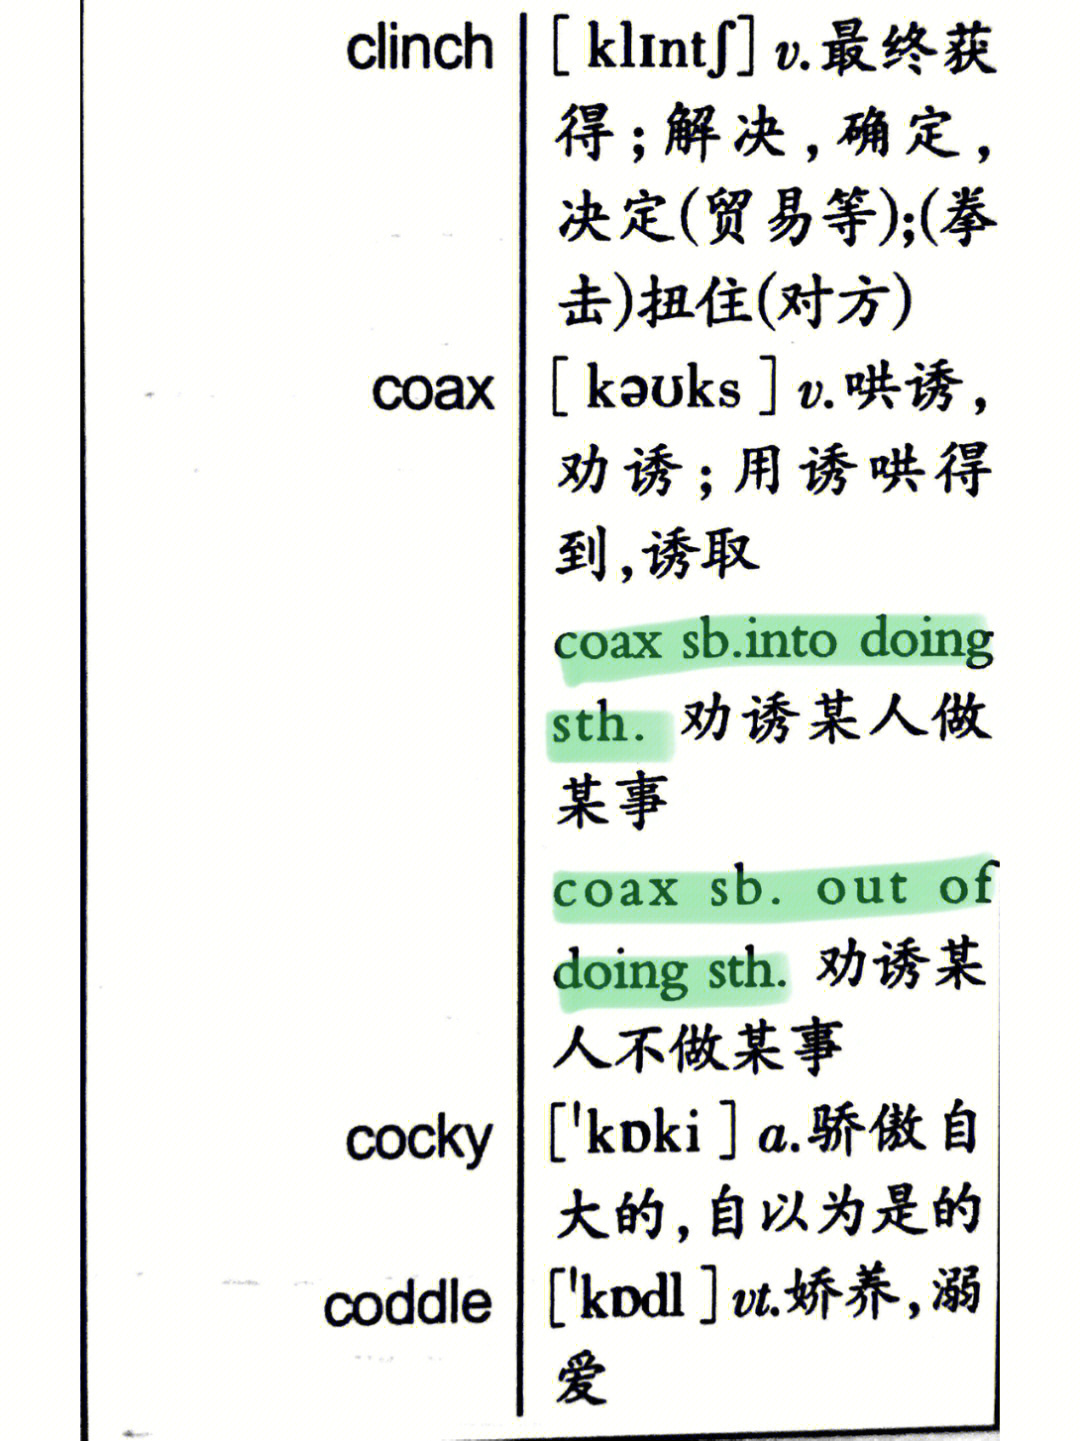 coax/cajole into doing 劝诱做…coax sb out of/from doing sth